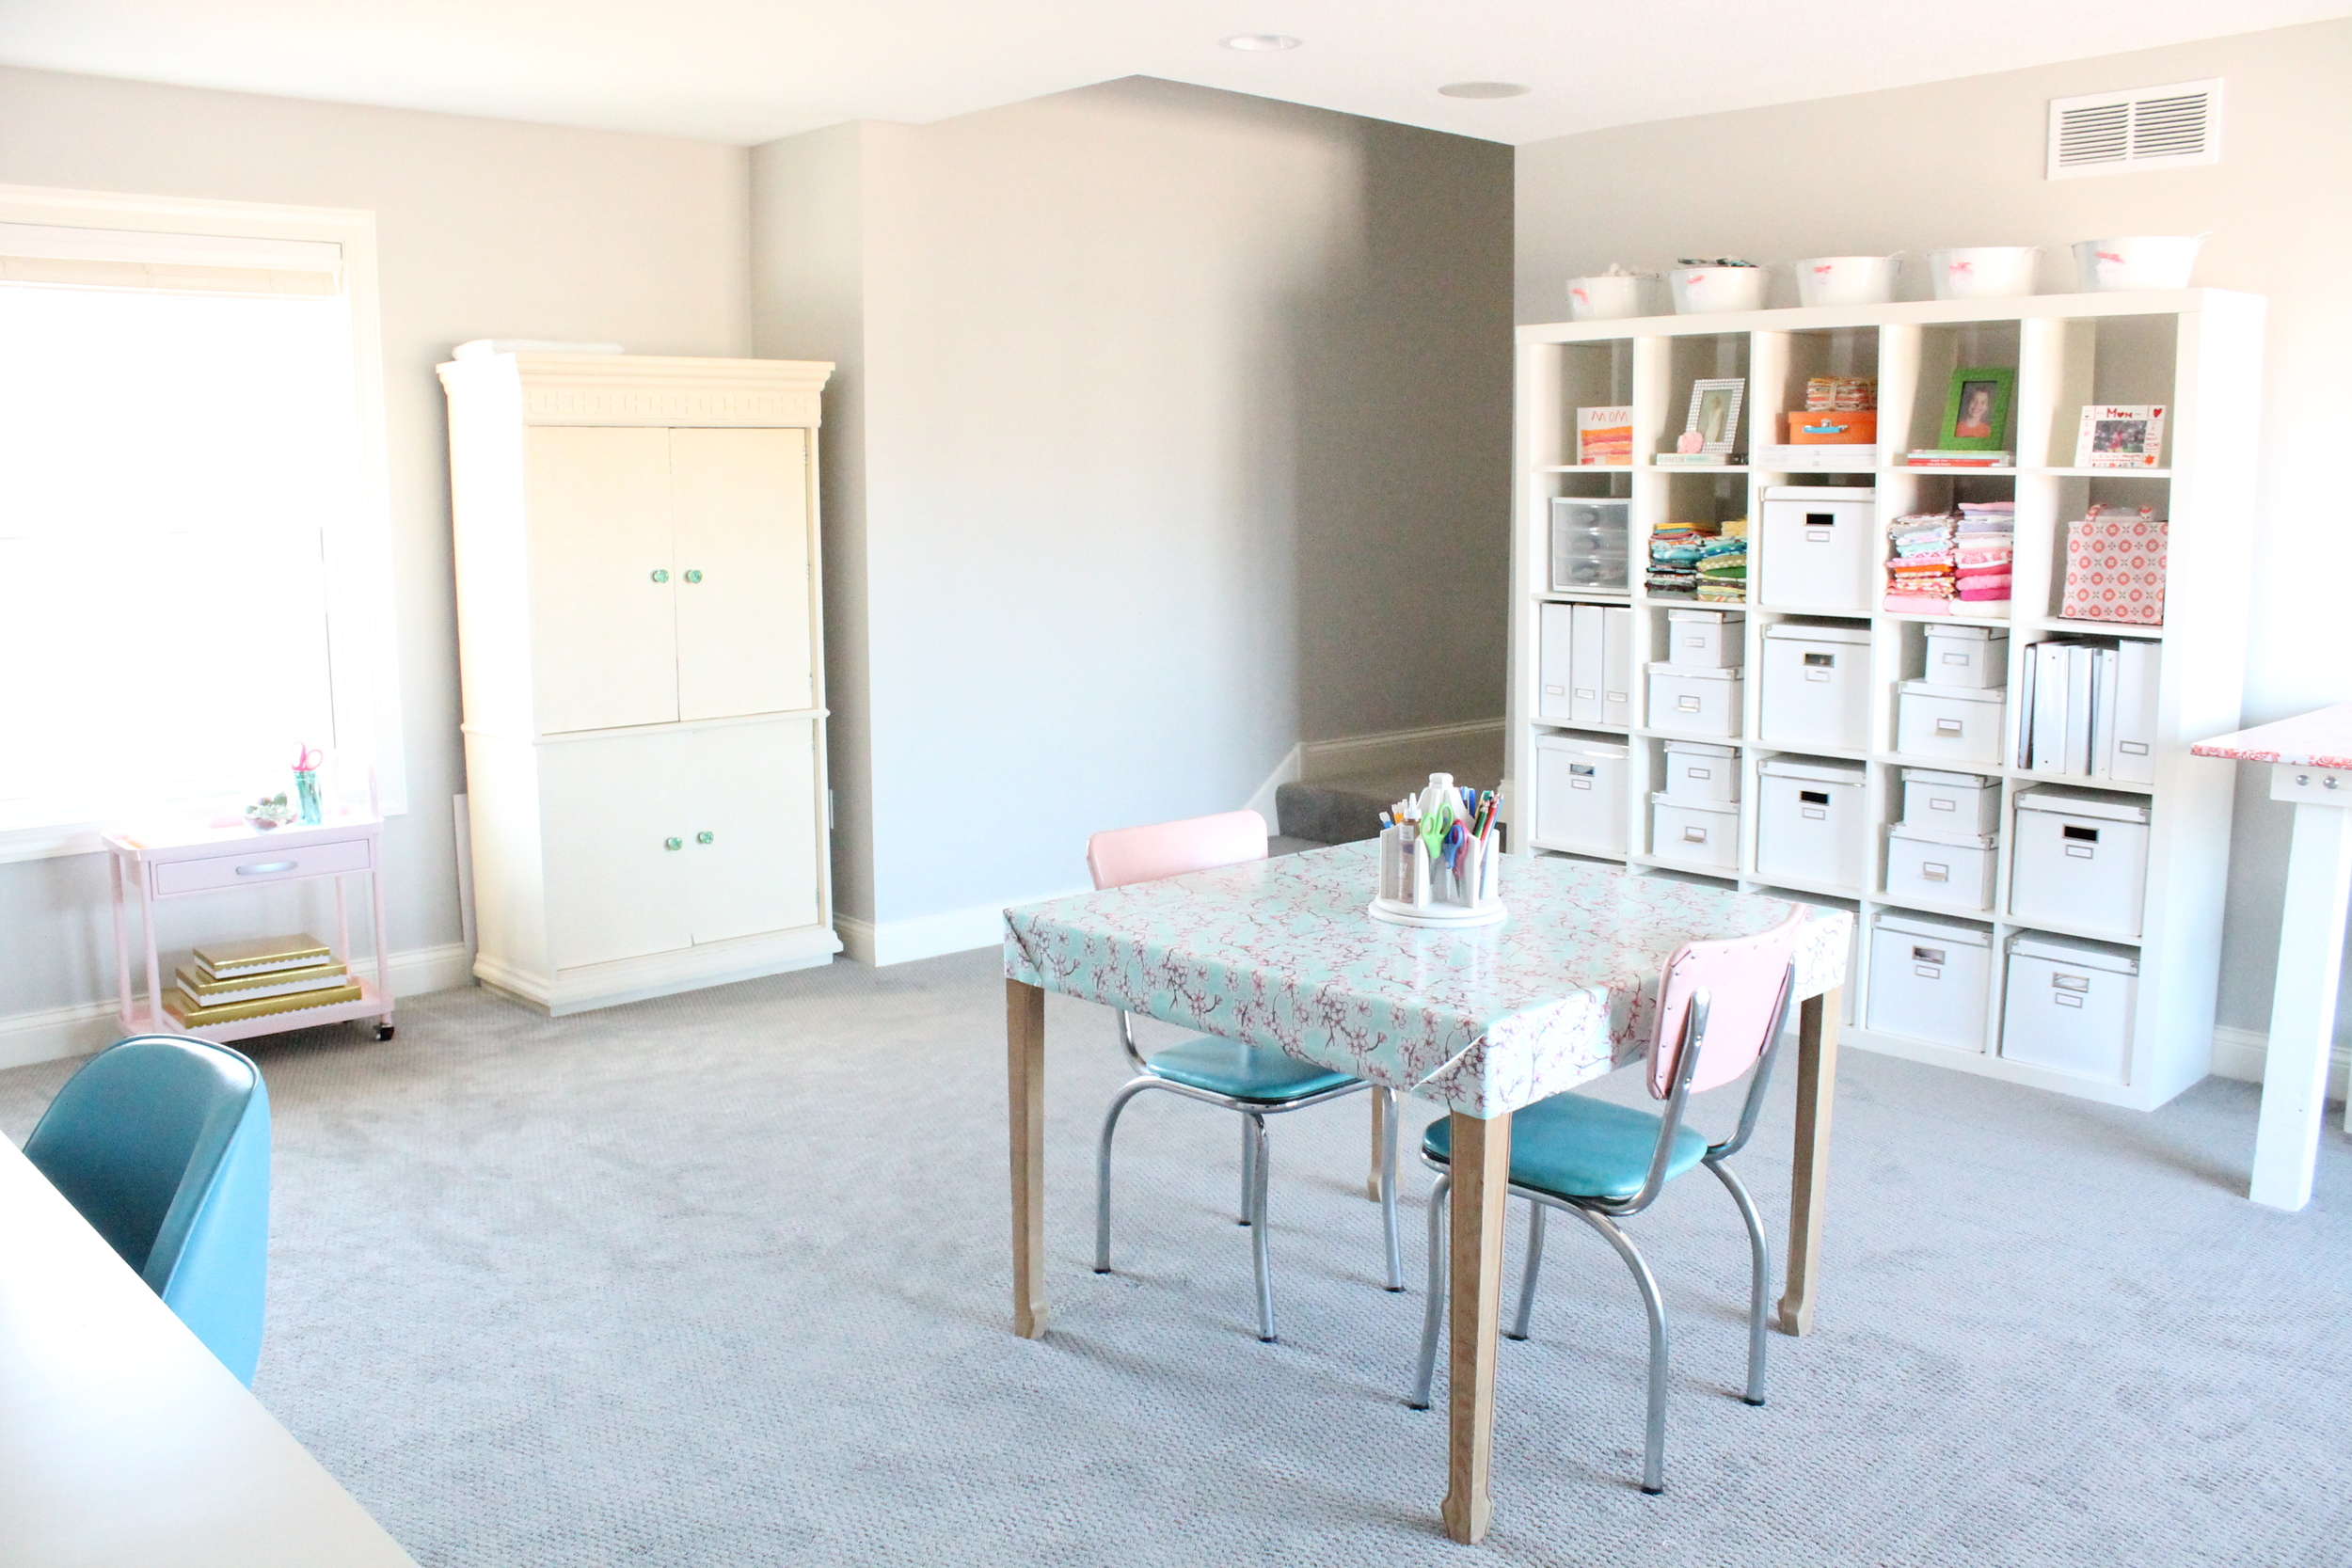 Family Craft Studio. Love how everyone in the family can share this creative space. A perfect craft room for sewing, scrapbooking, wrapping presents or just reading a book.